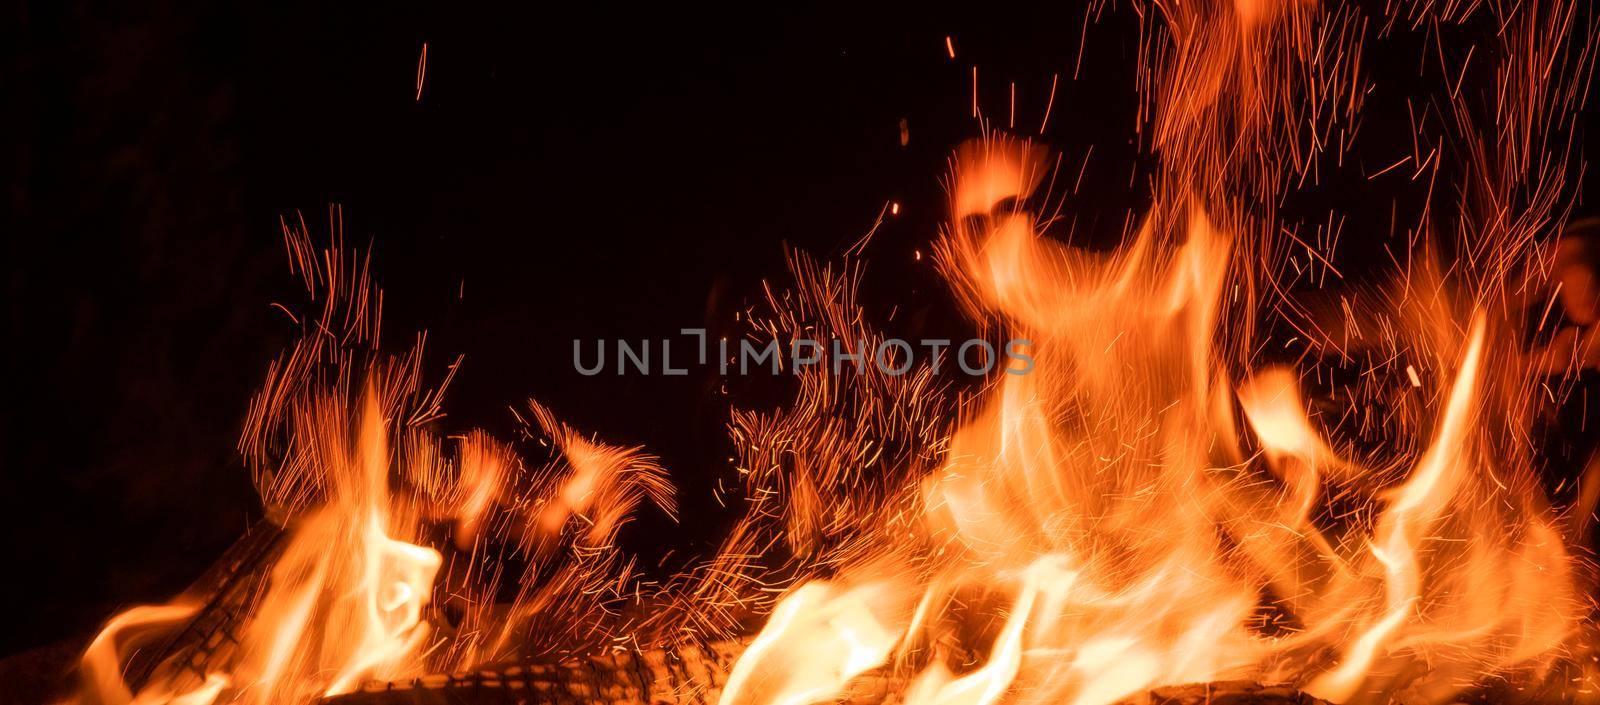 Fire flame isolated on black background by GekaSkr